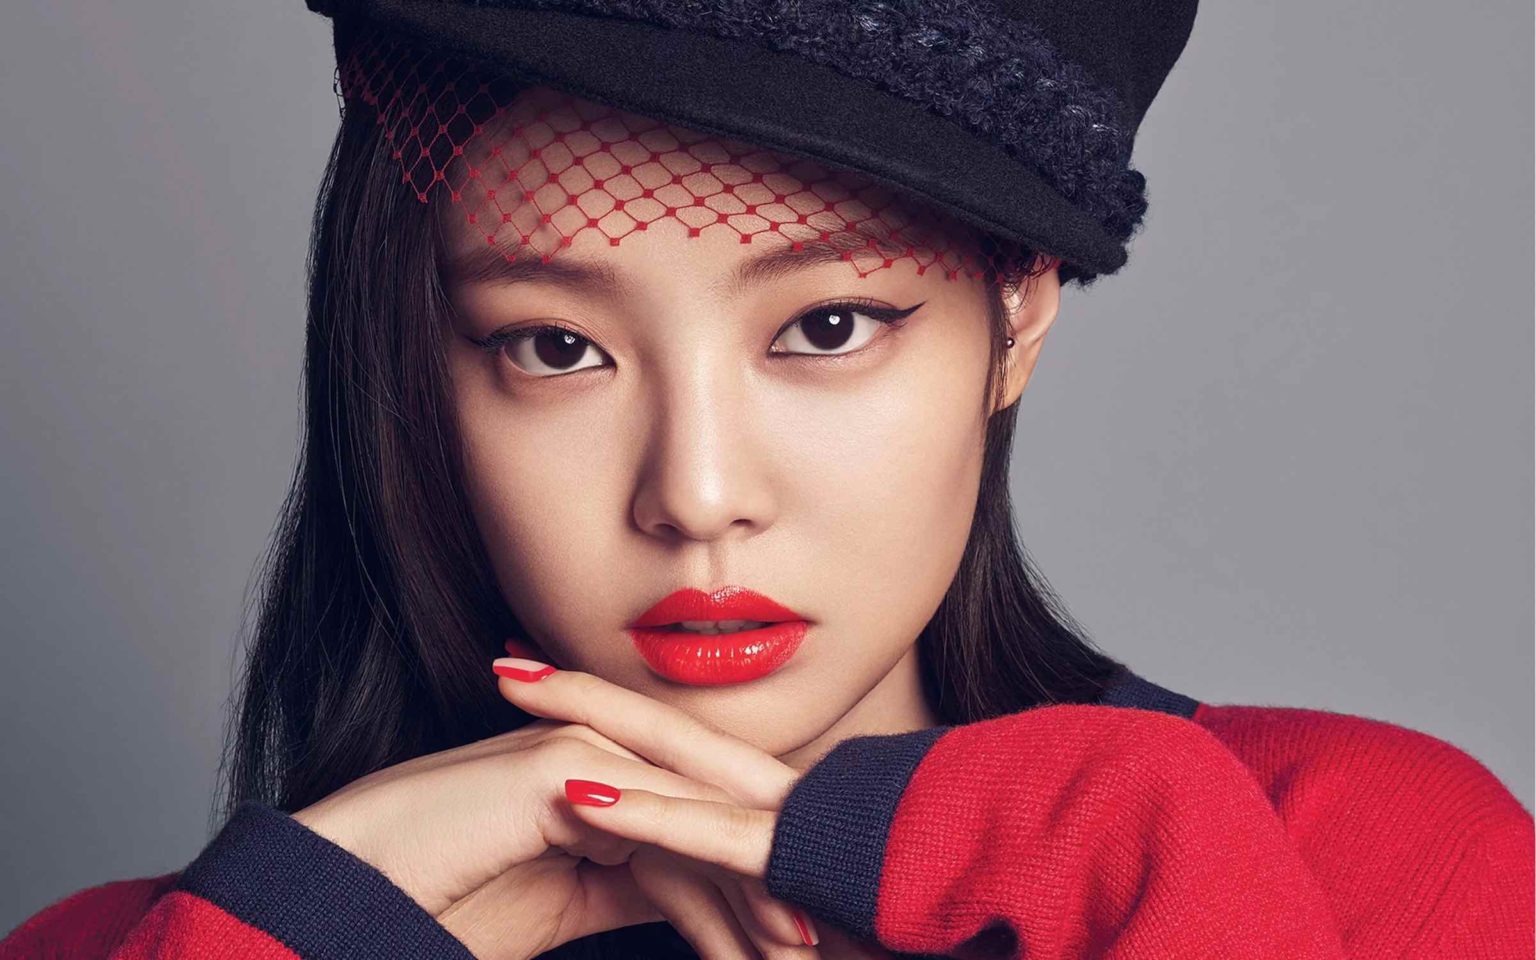 Do you stan BLACKPINK and more specifically Jennie? Here's our 8 amazing facts about K-pop sensation Jennie.